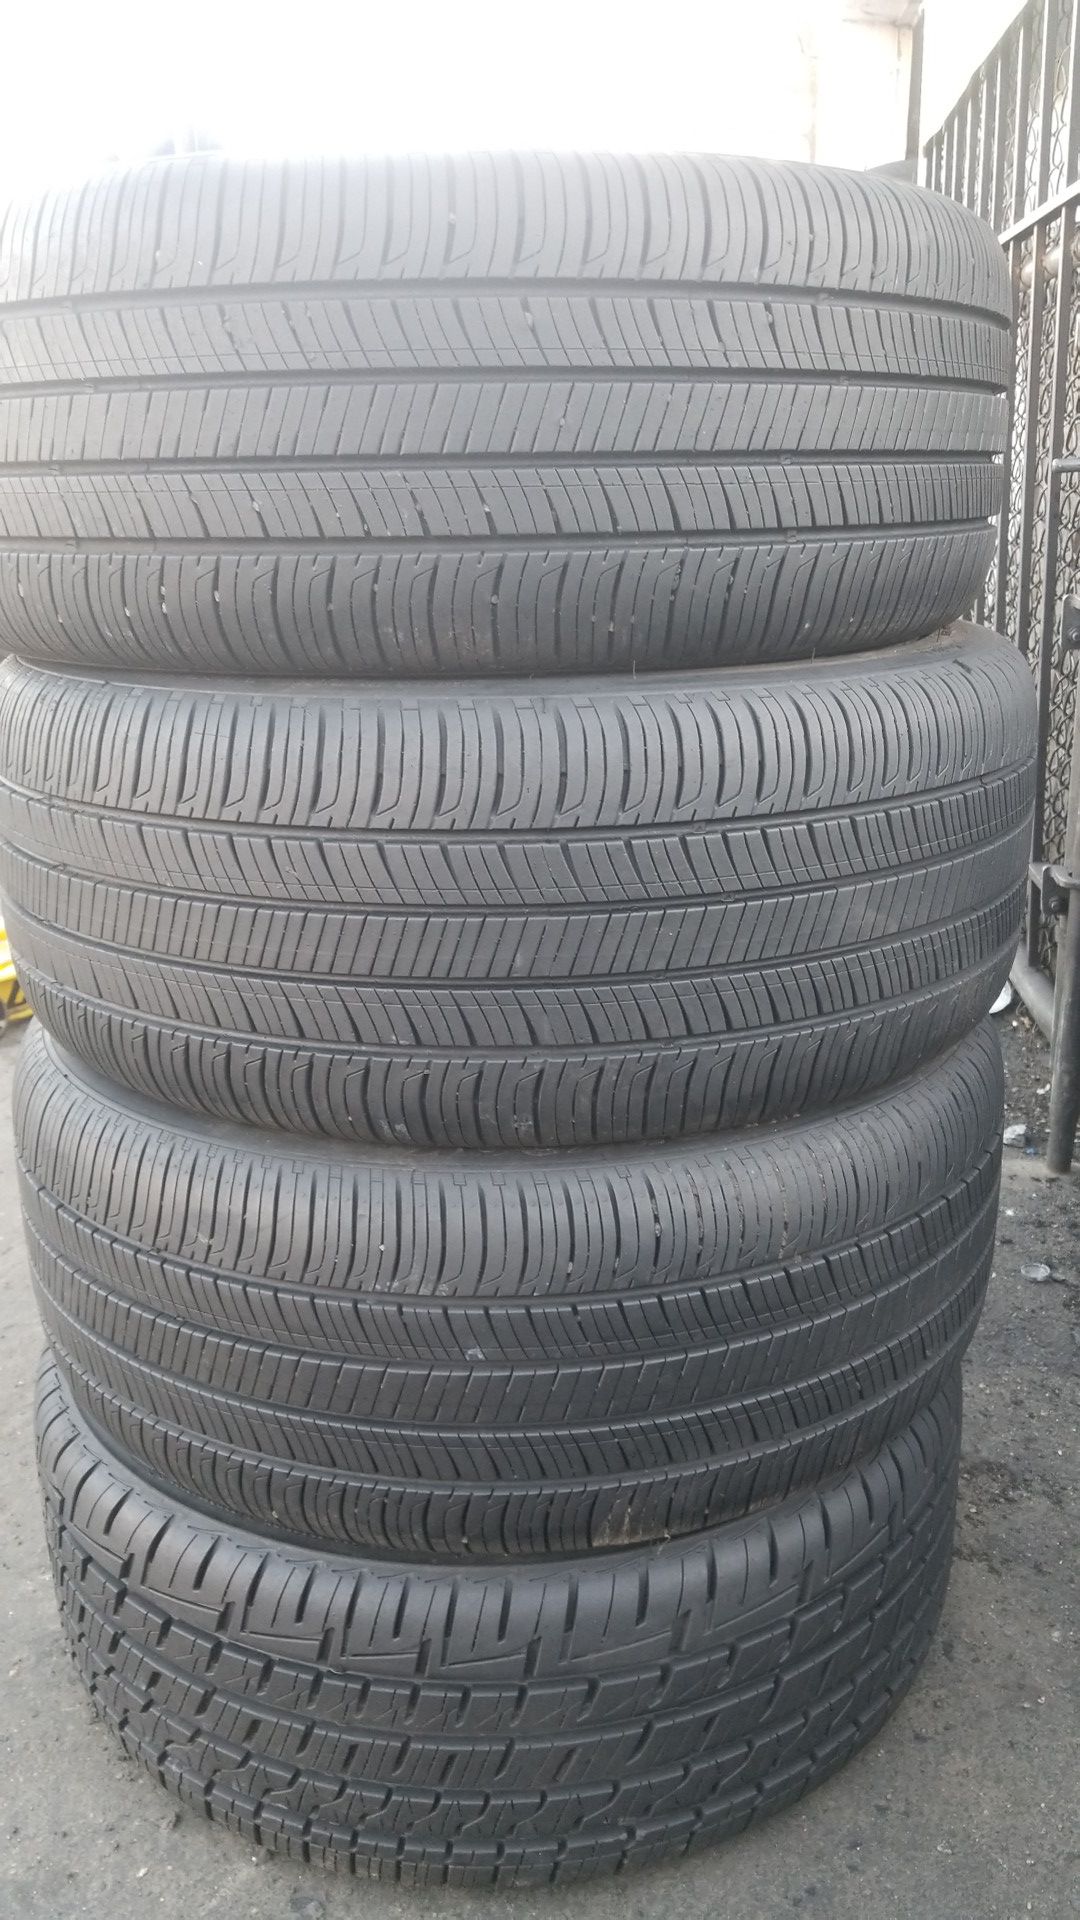 Nissan rims and tires for sale